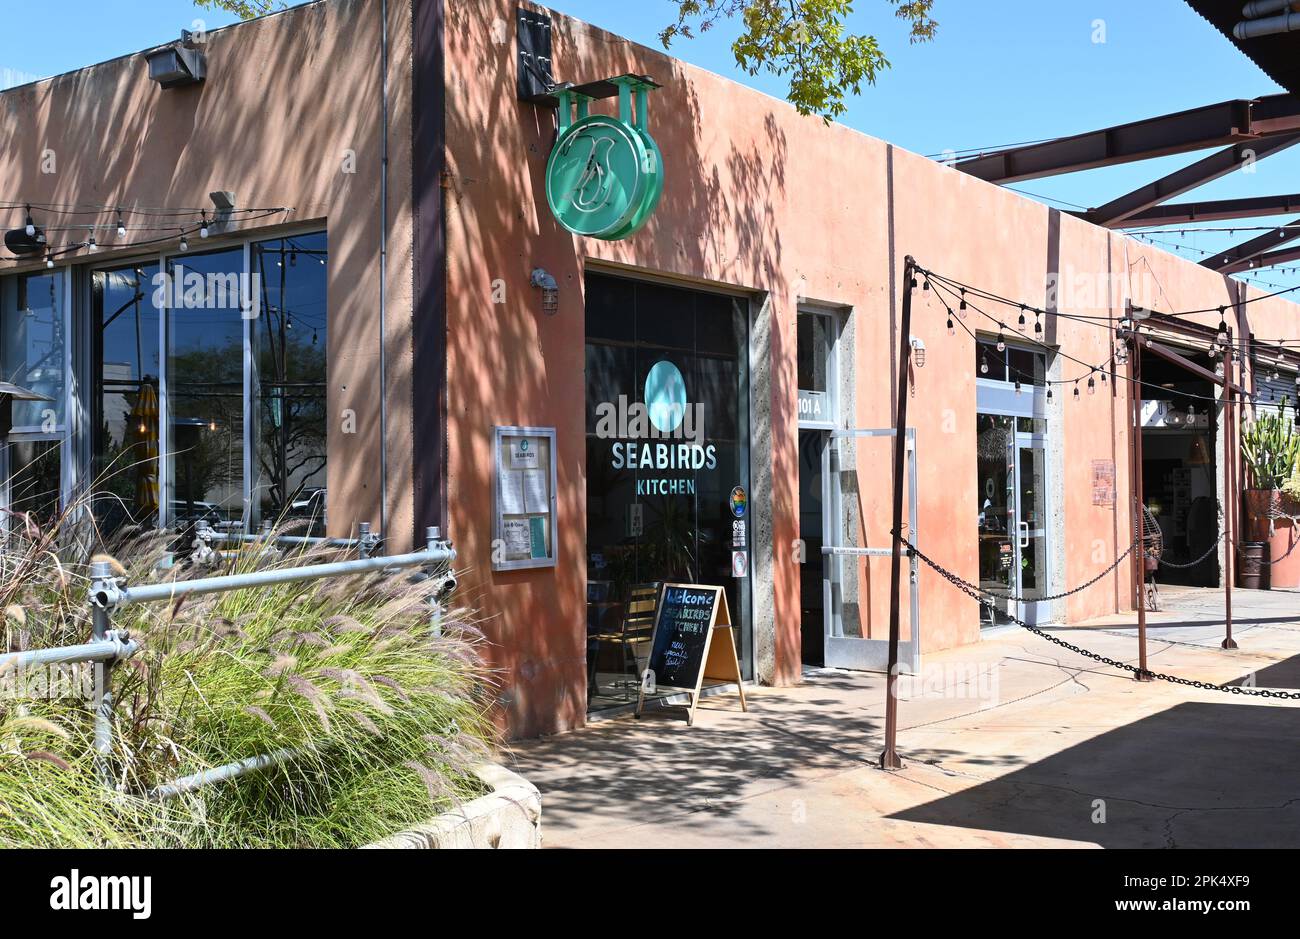 COSTA MESA, CALIFORNIA: 4 APR 2023: Seabirds Kitchen at The Lab Anti Mall a modern, open-air destination featuring trendy retail shops, a range of res Stock Photo